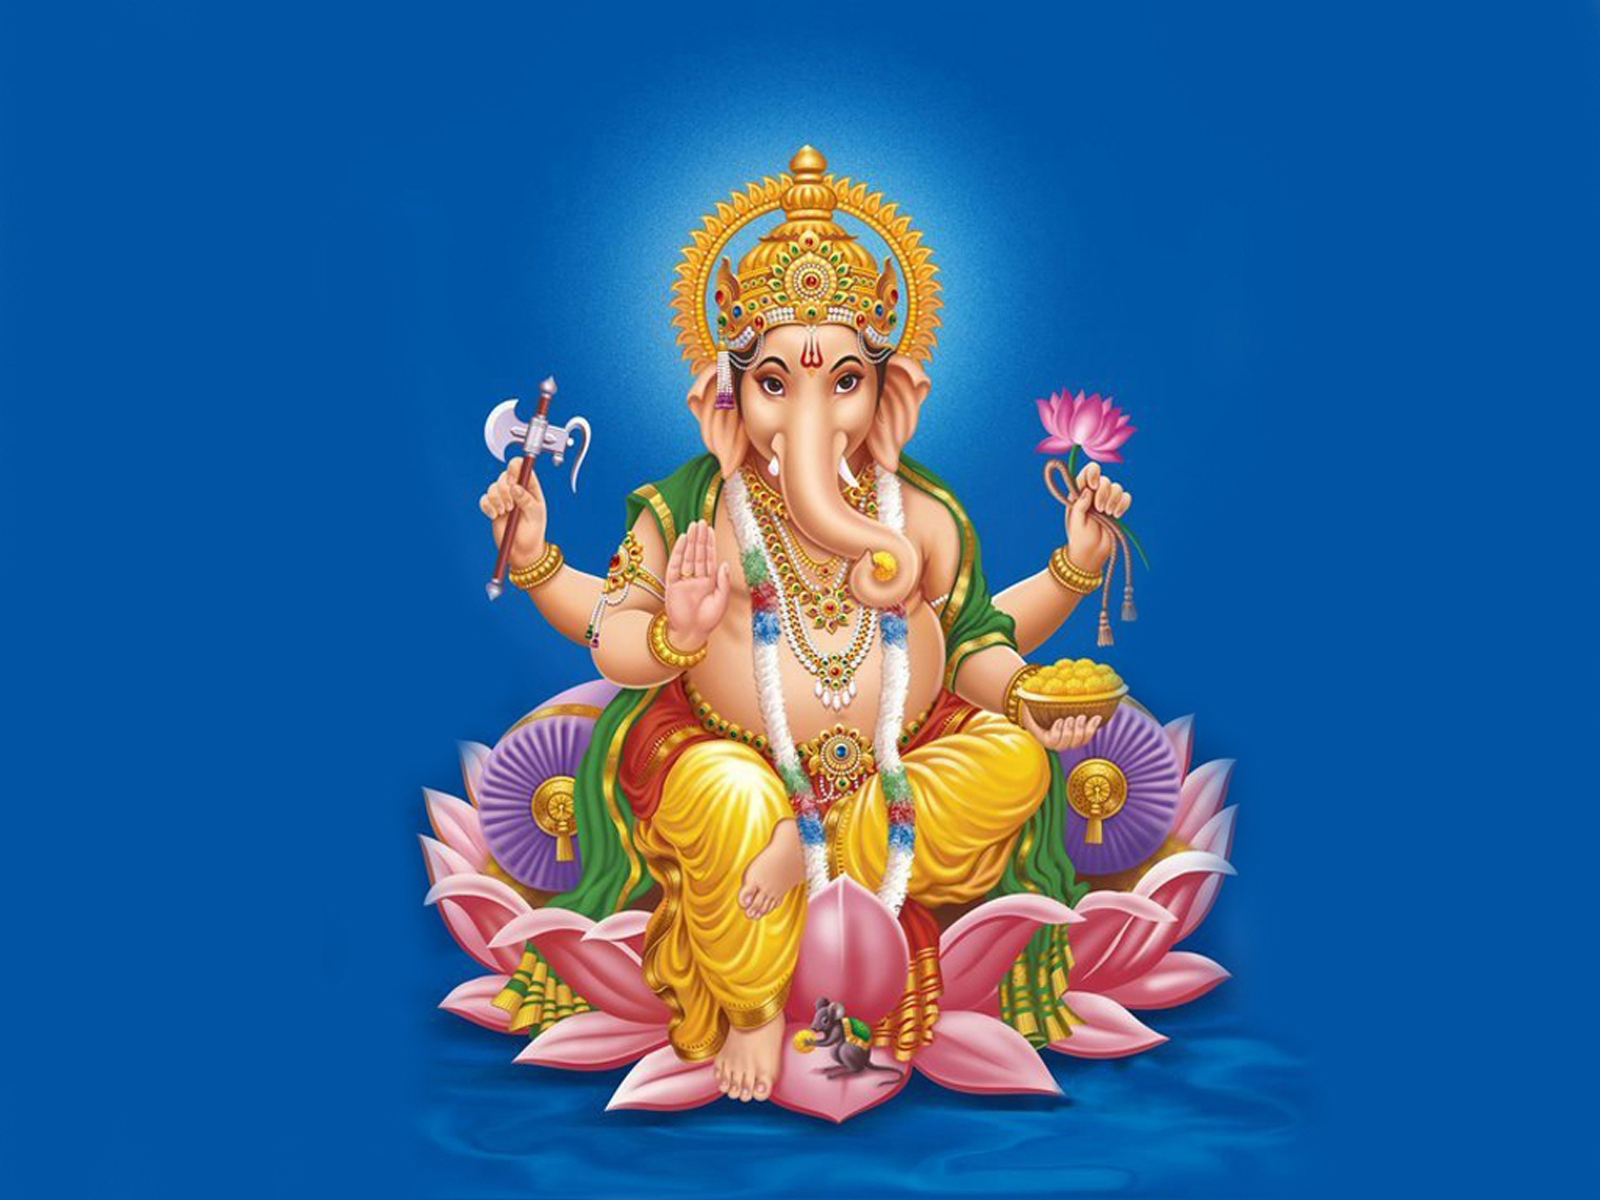 Lord Ganesh - Significance of Hindu Deity As the Lord of Success ...